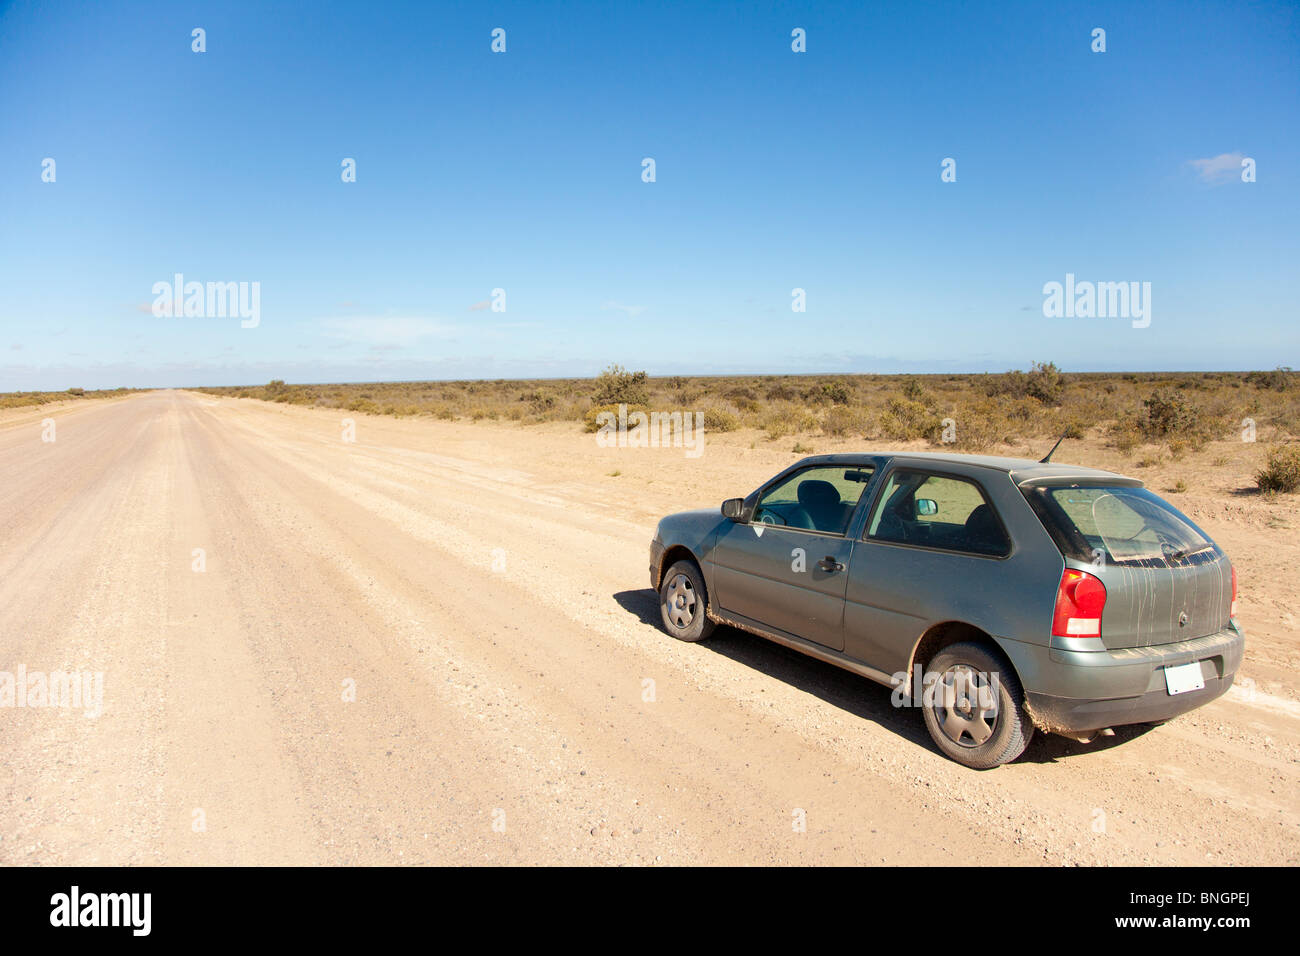 Car on the side of a long dirt road Stock Photo